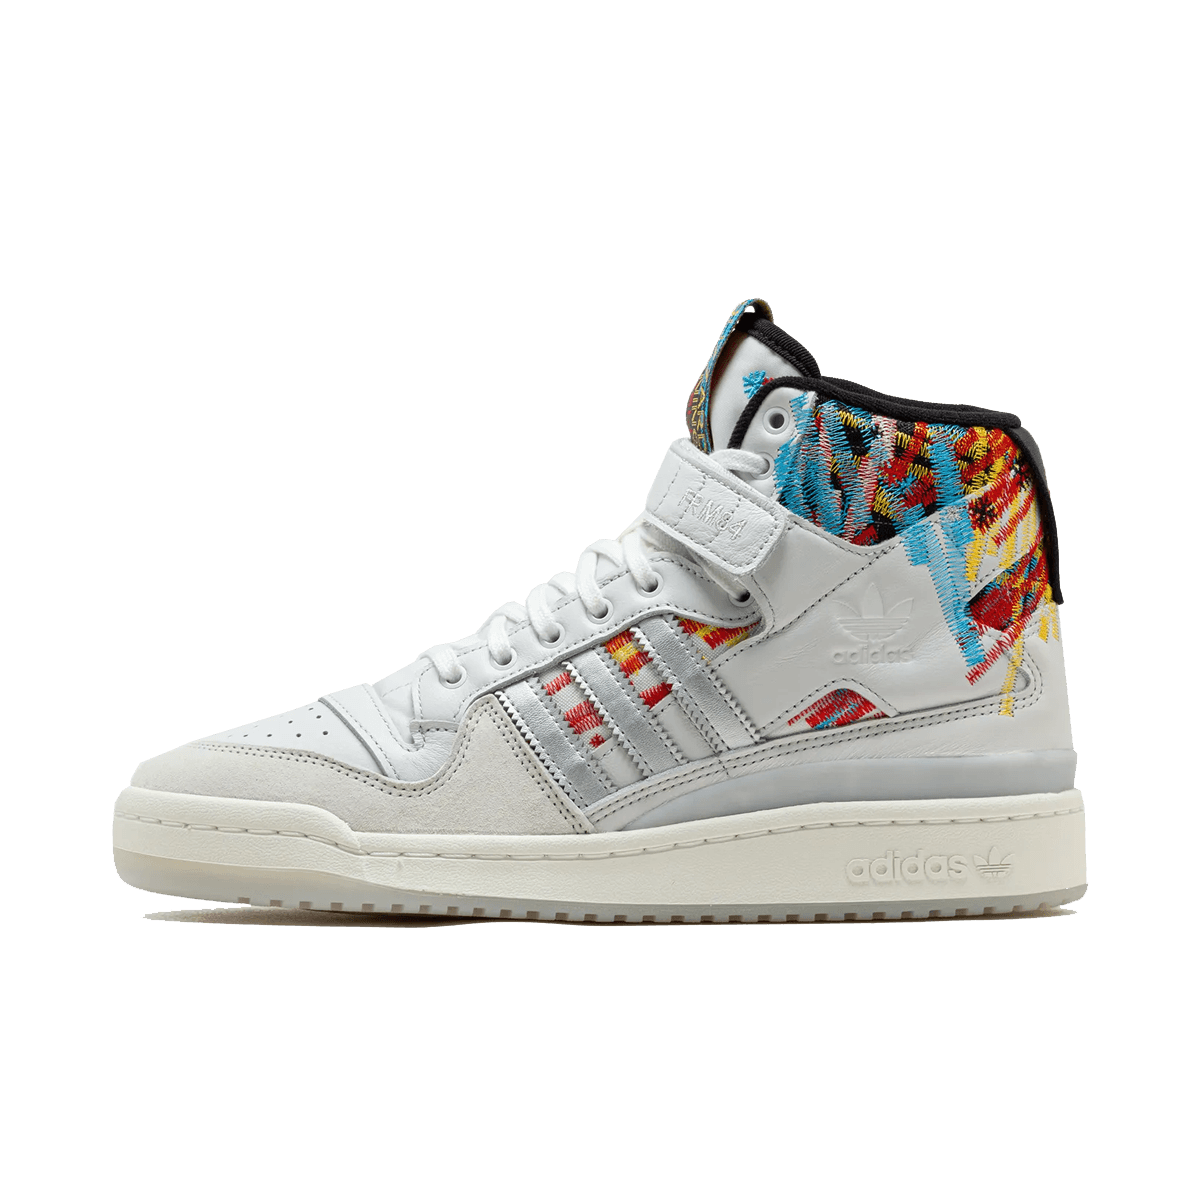 Jacques Chassaing x adidas Forum 84 High NBA Jaccard